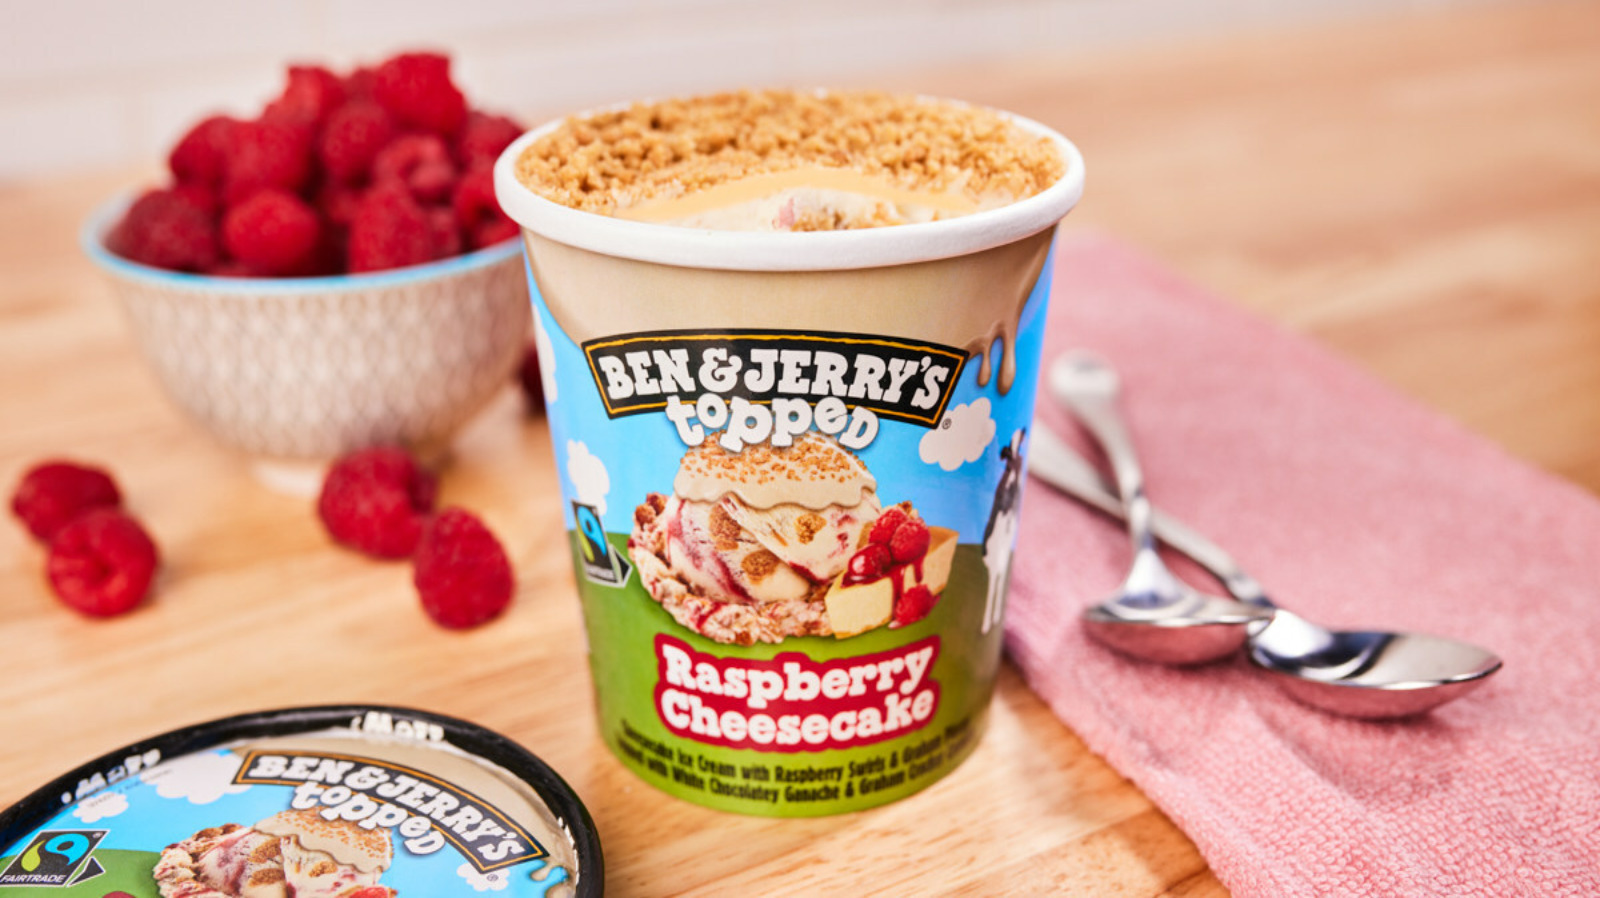 Ben & Jerry's New Ice Cream Flavors Are Inspired By Delicious Desserts